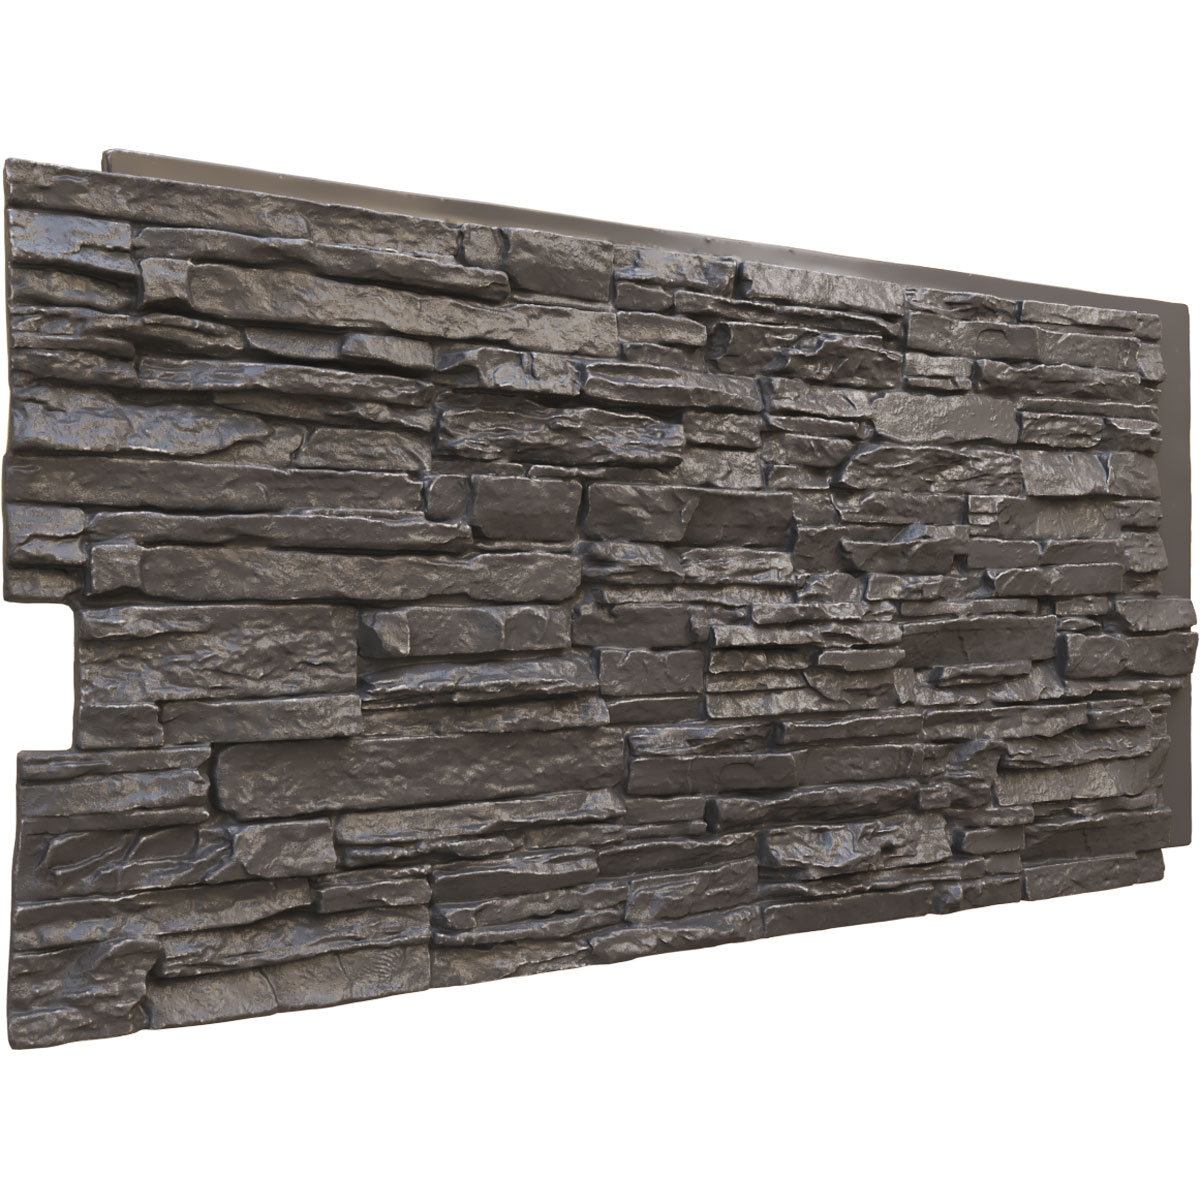 A small rustic stone alcove in an antique cut stone wall, perfect for  display on Craiyon